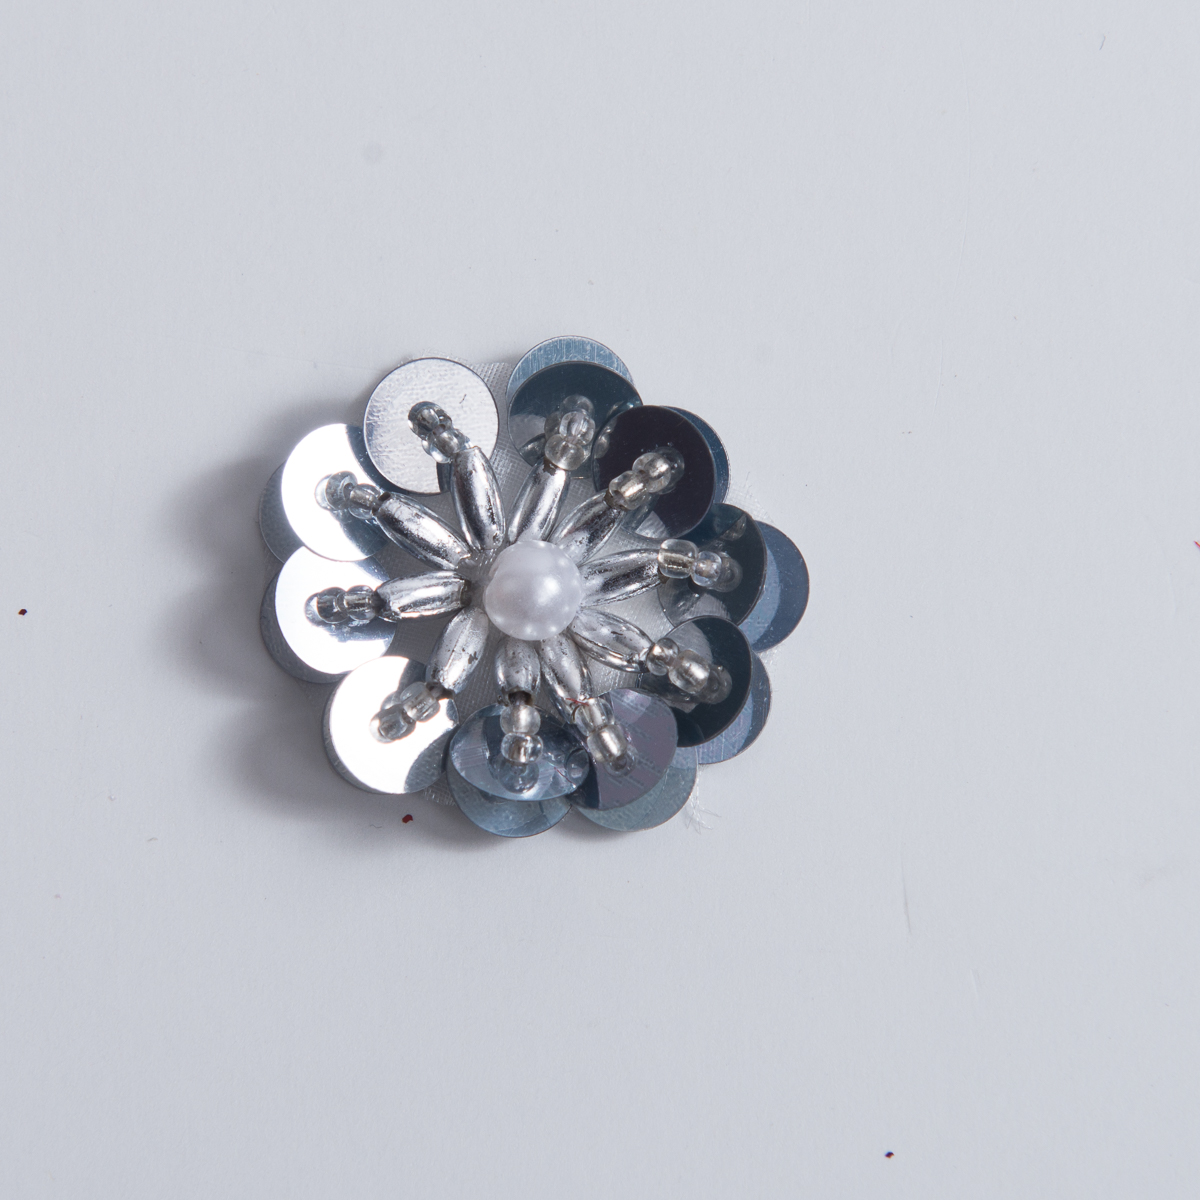 6ct Sequin Flower Charms by hildie & jo